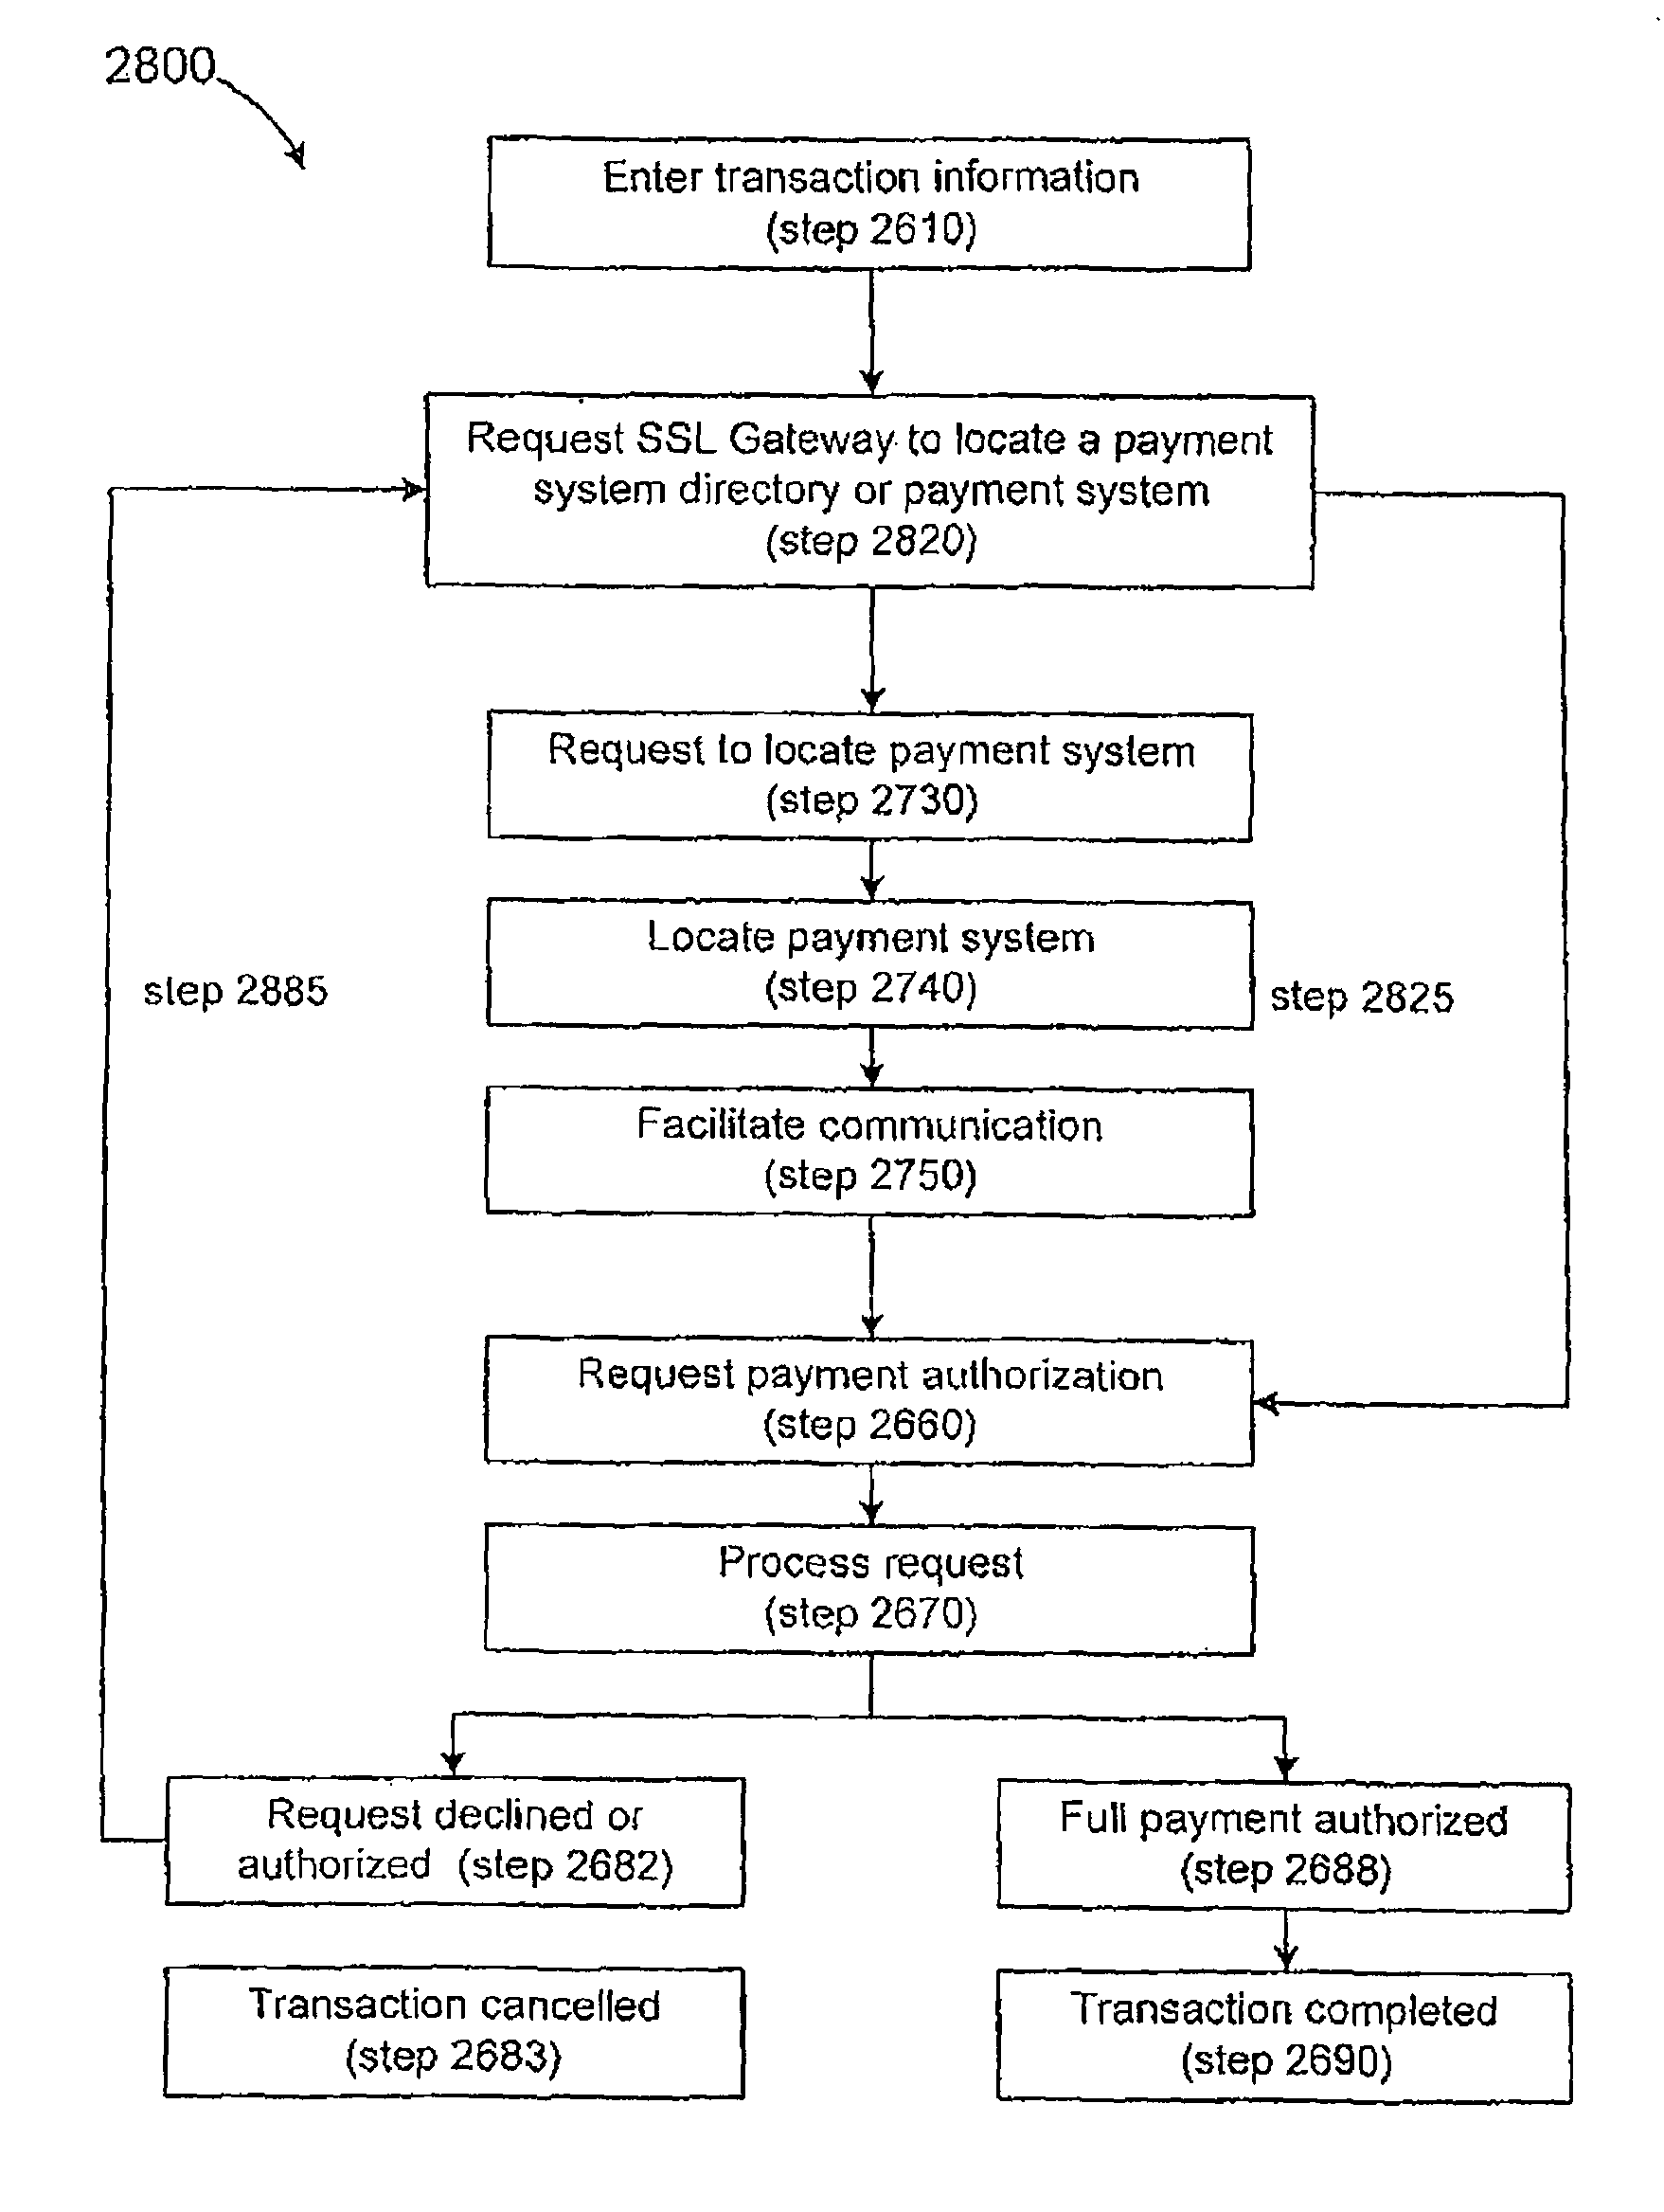 Systems and methods for point of interaction based policy routing of transactions